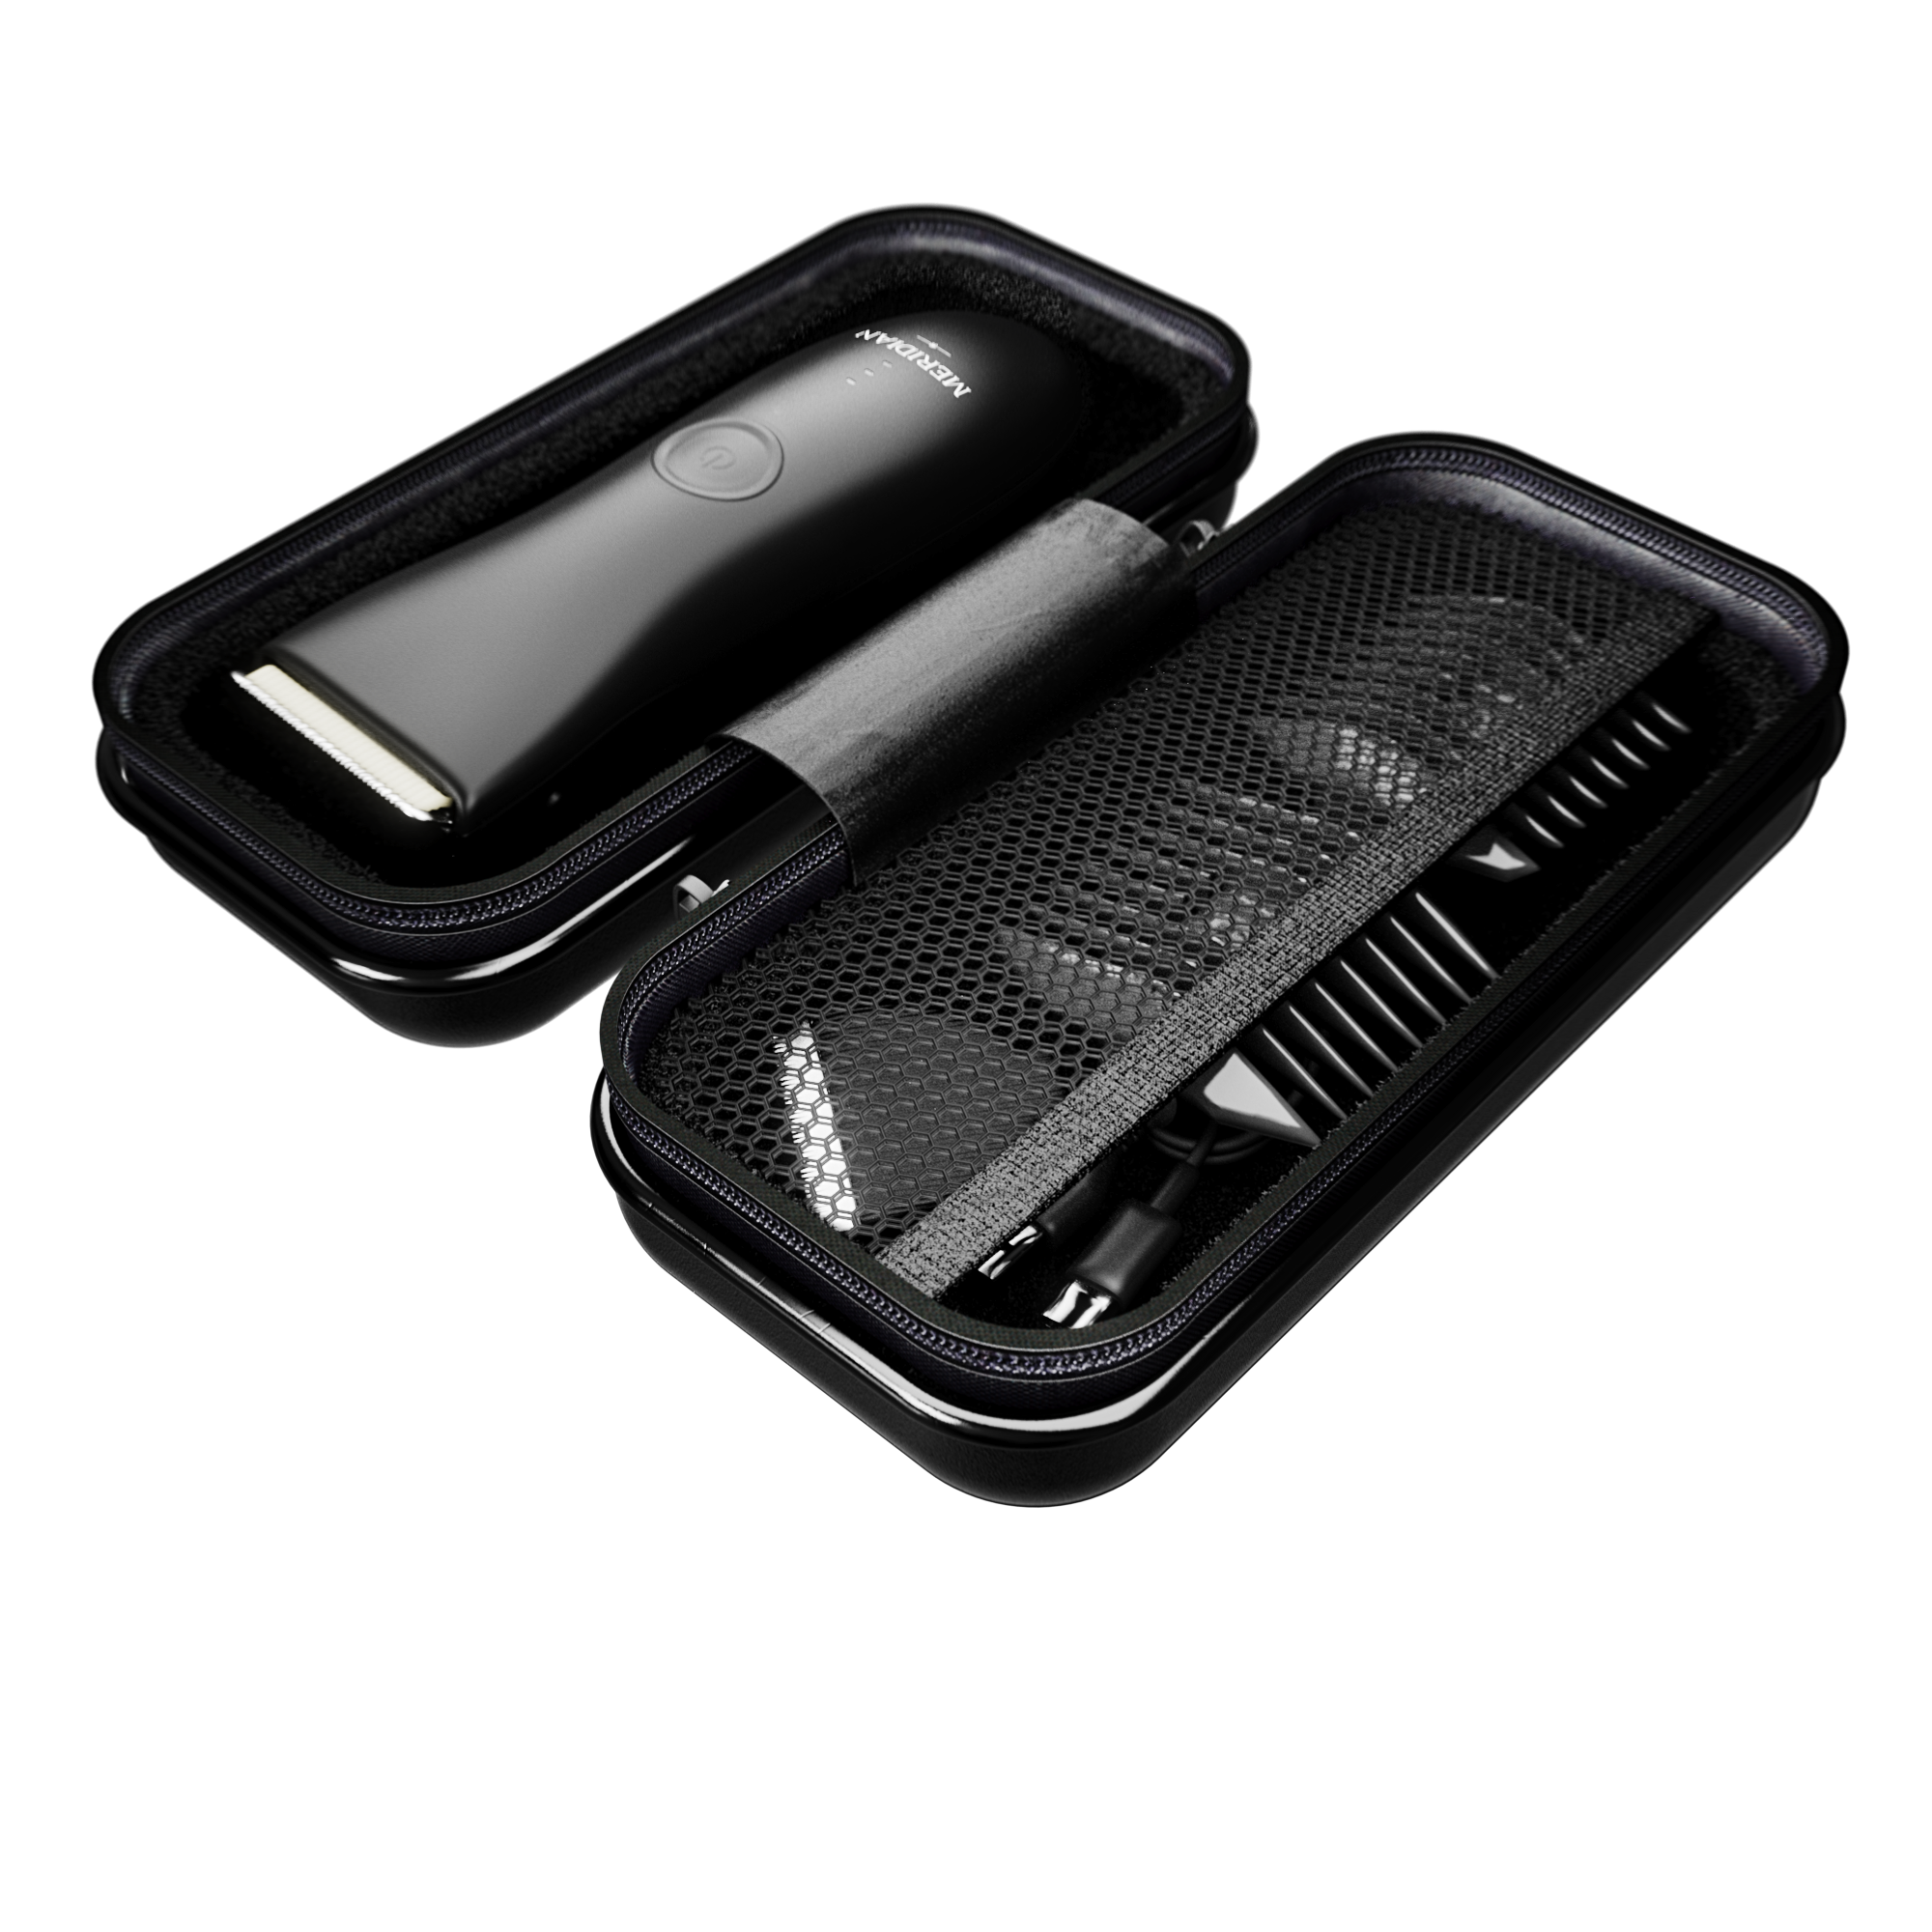 Travel Case - Travel Grooming Bag For Self-Care Tools